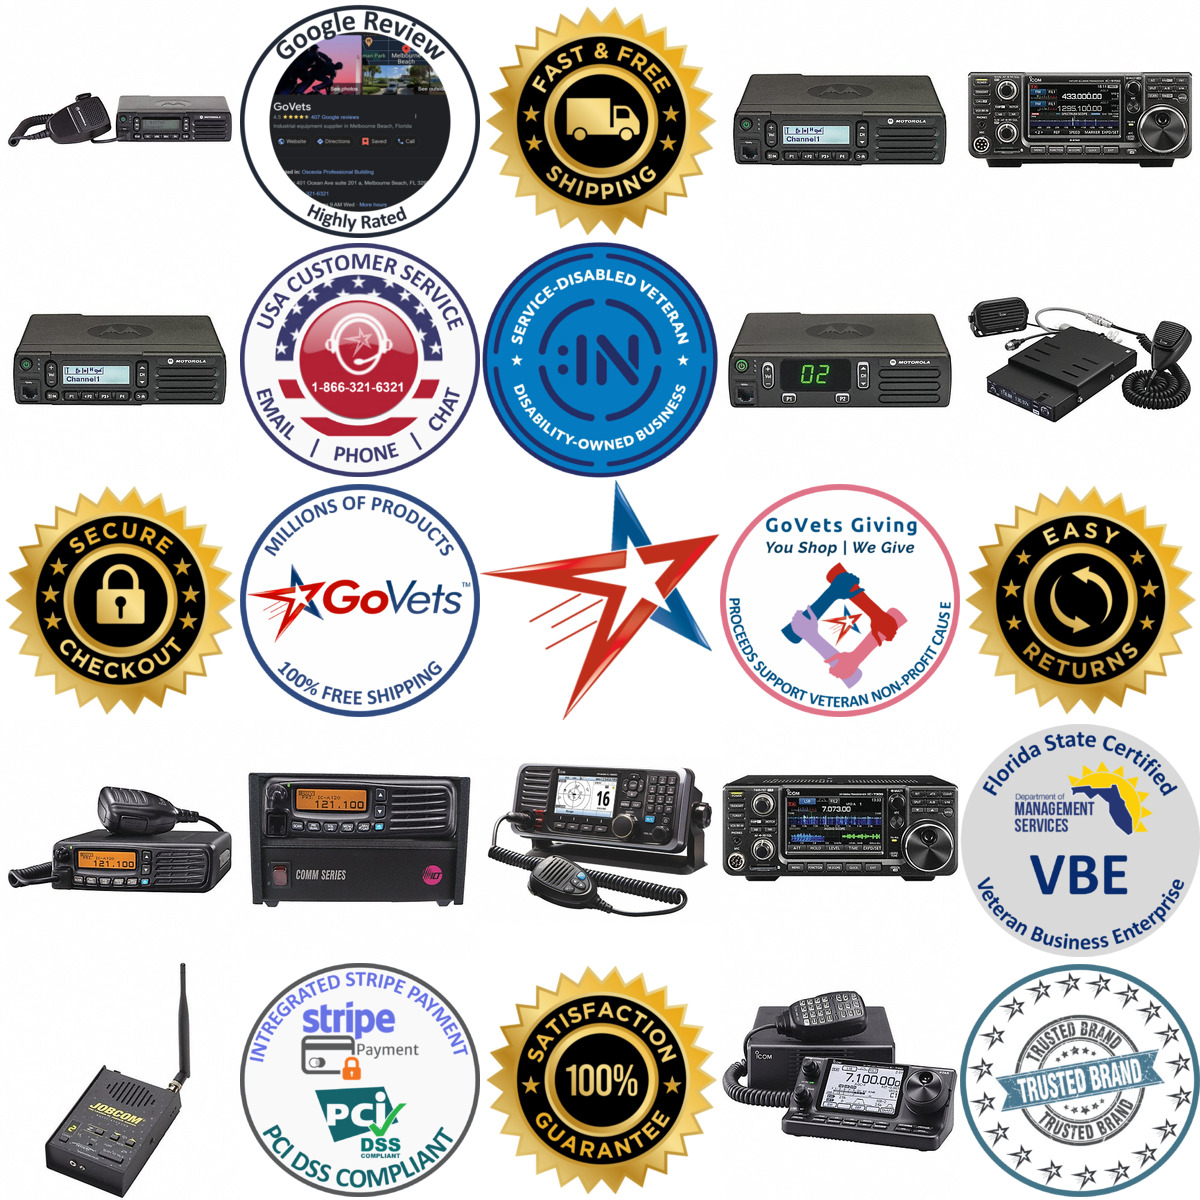 A selection of Mobile Two Way Radios products on GoVets